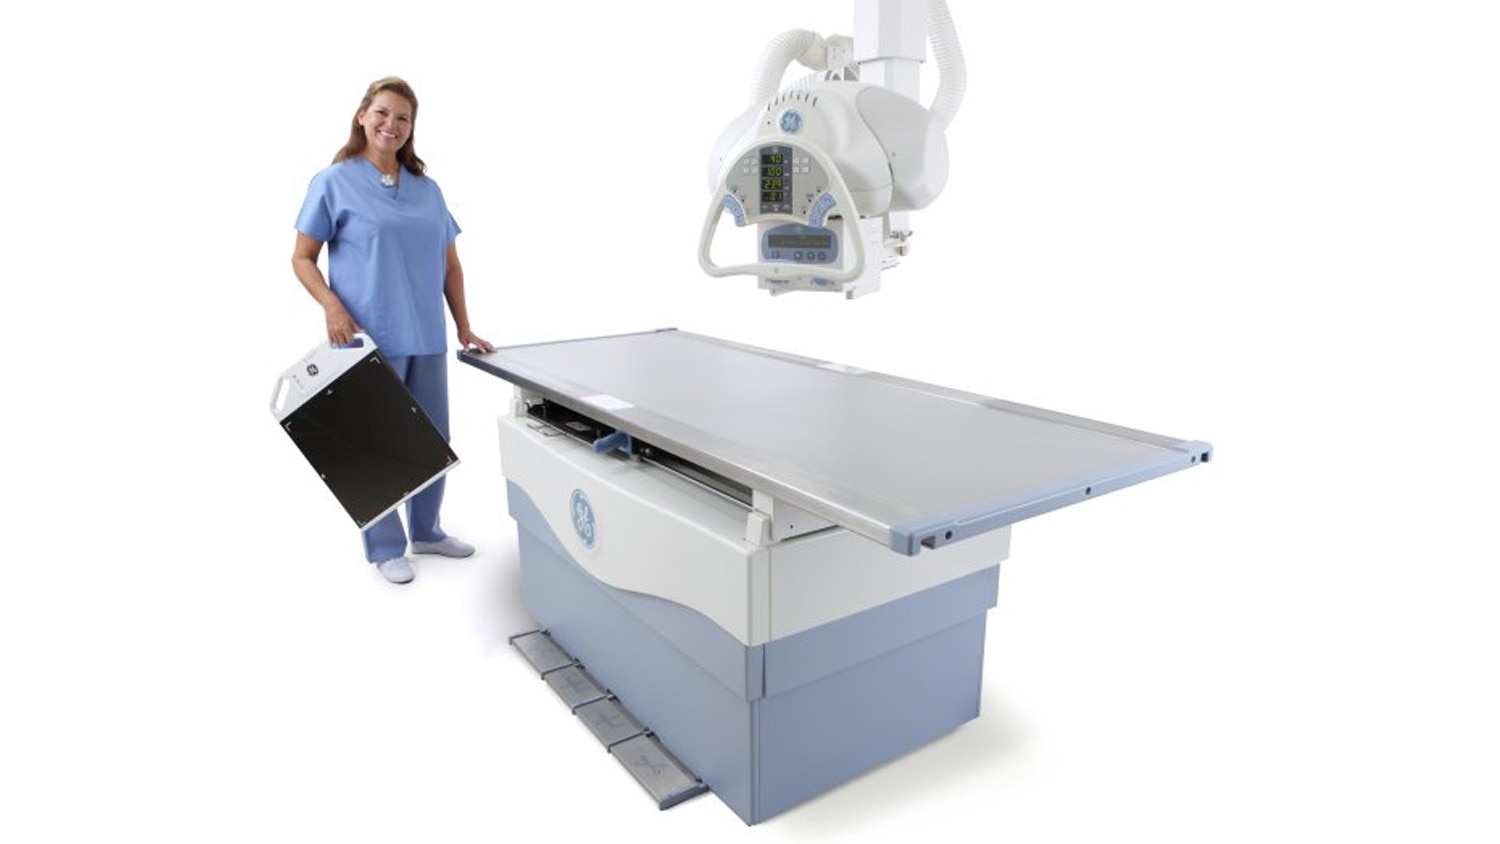 education-product-education-clinical-tip-applications-x-ray-proteus-xray-system_jpg